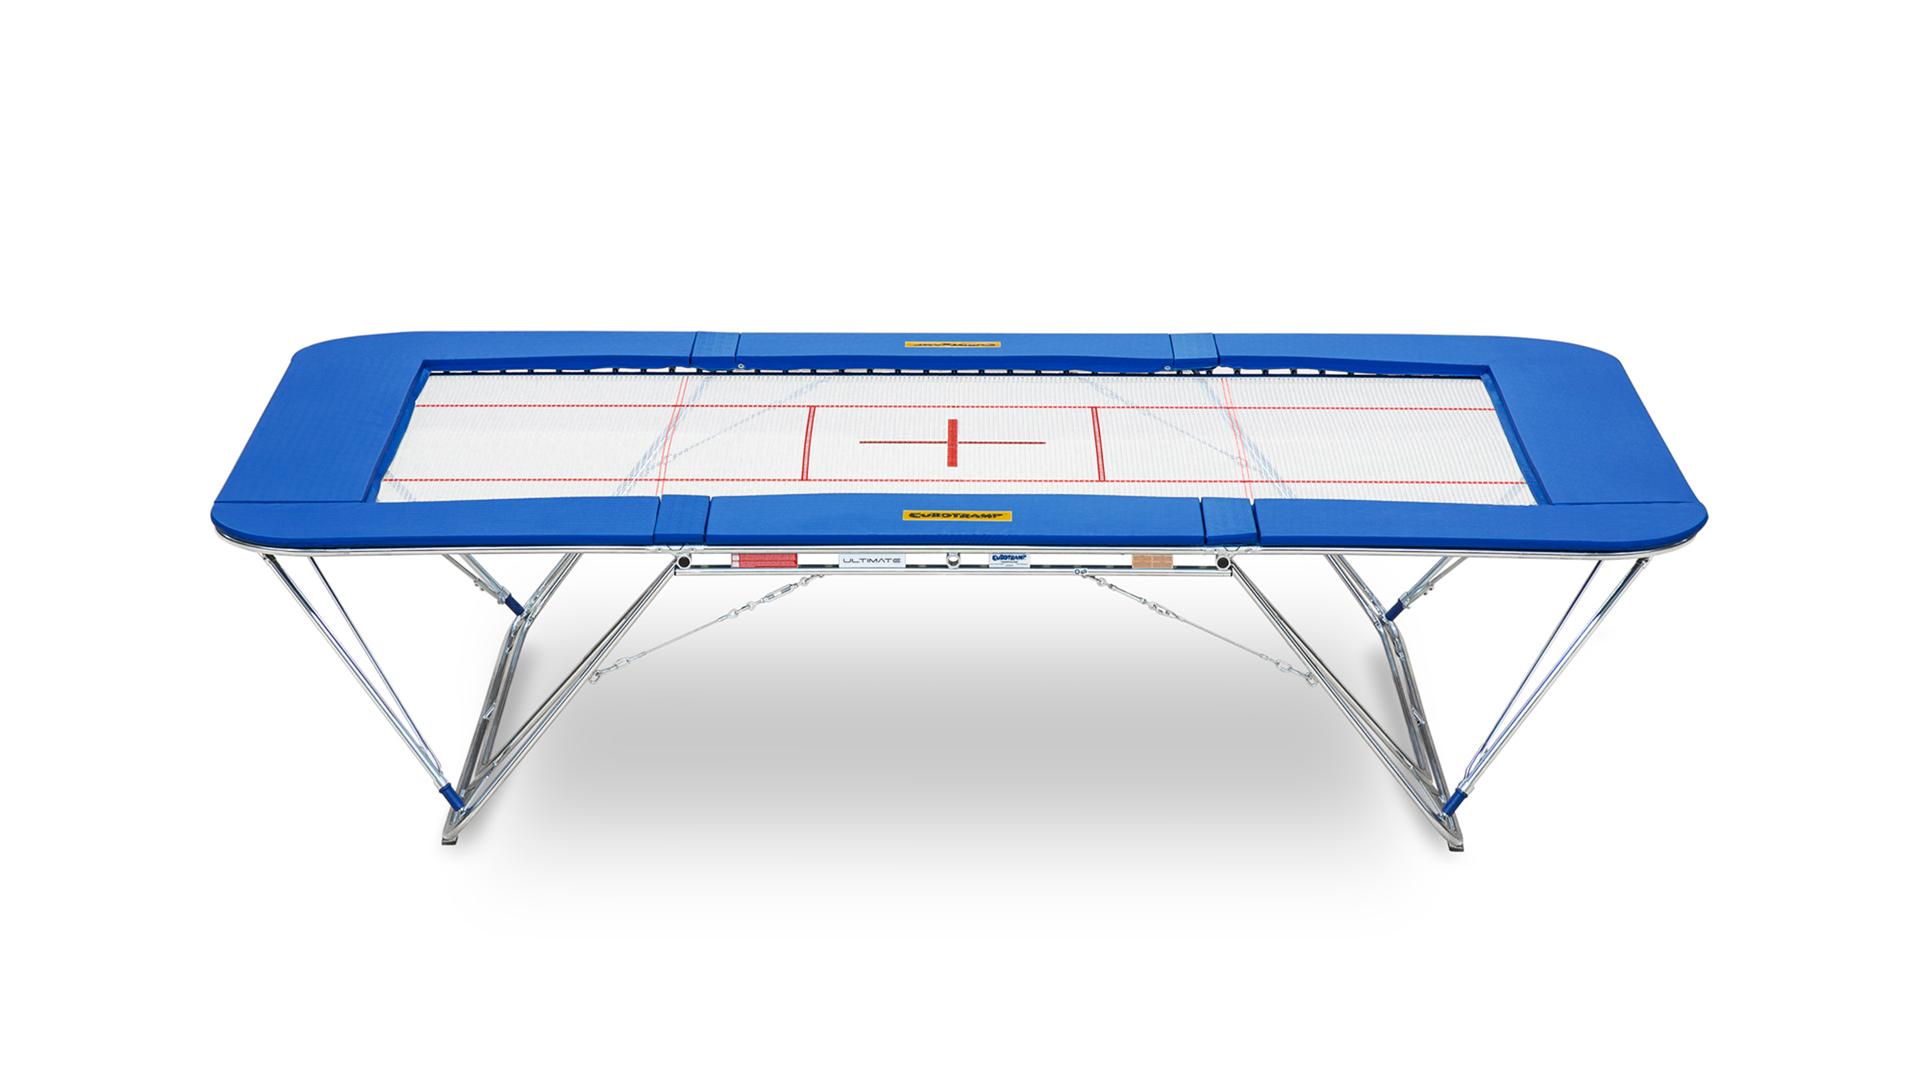 Professional competition trampoline "Ultimate" Trampoline